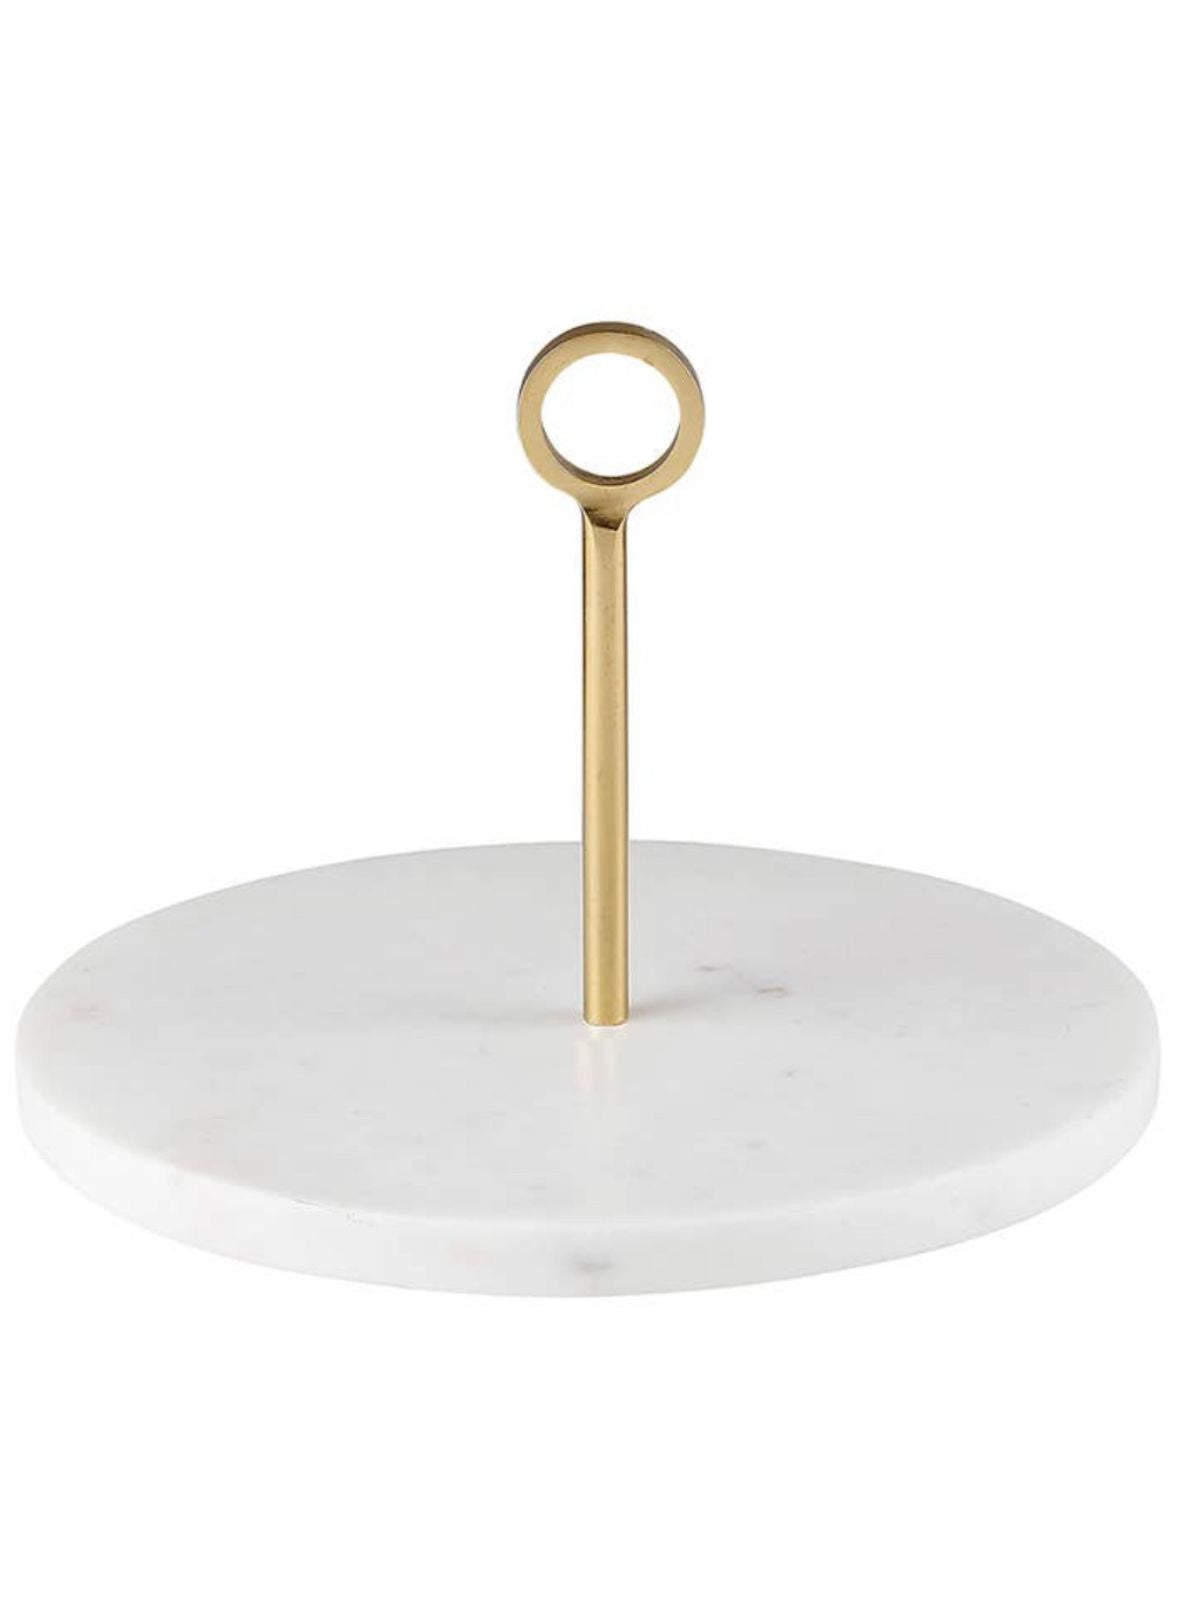 8D White Marble Server with Gold Brass Handle. 